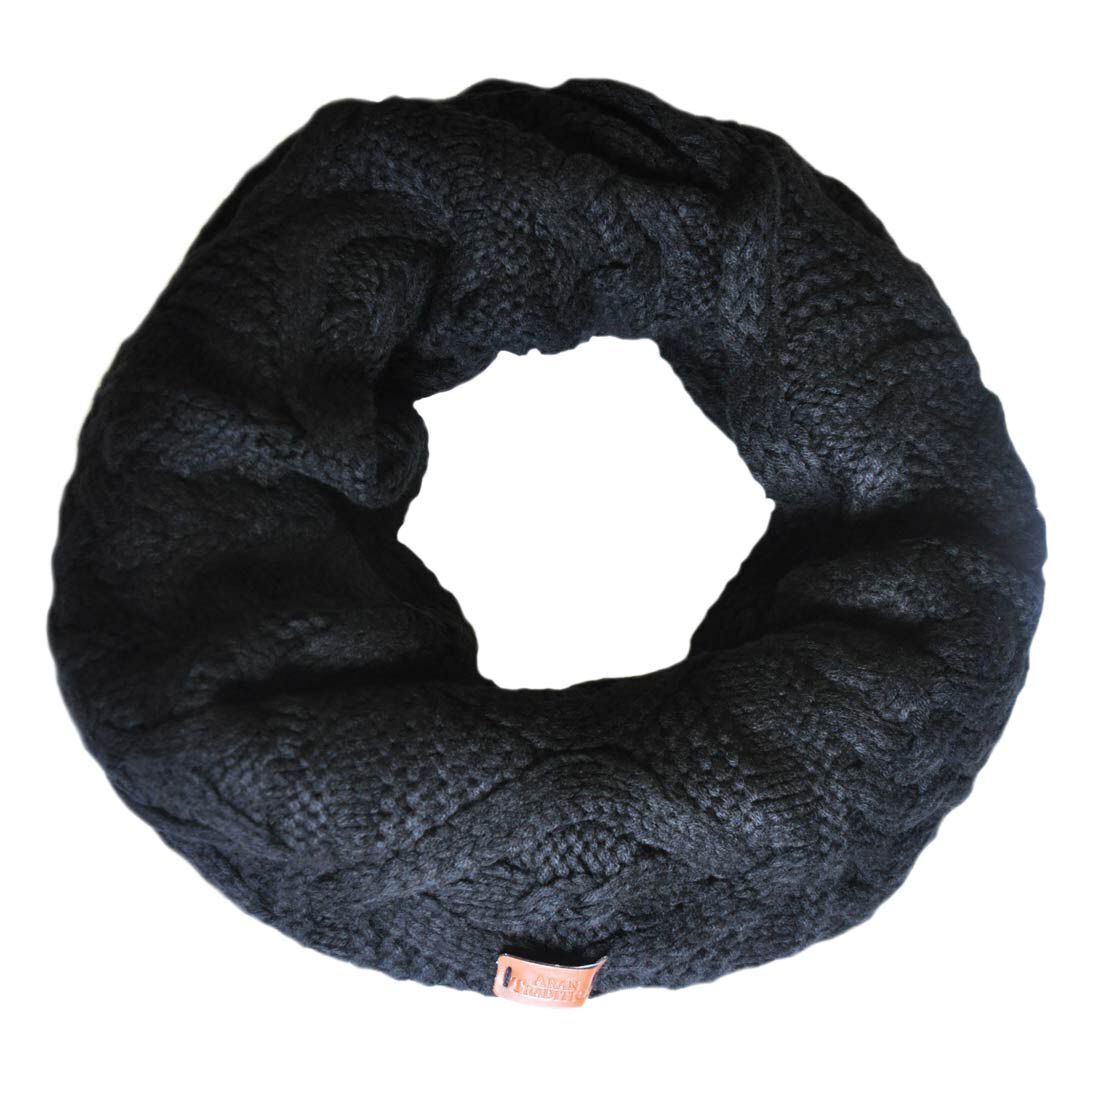 Buy Aran Traditions Knitted Style Cable Design Snood Black Colour ...